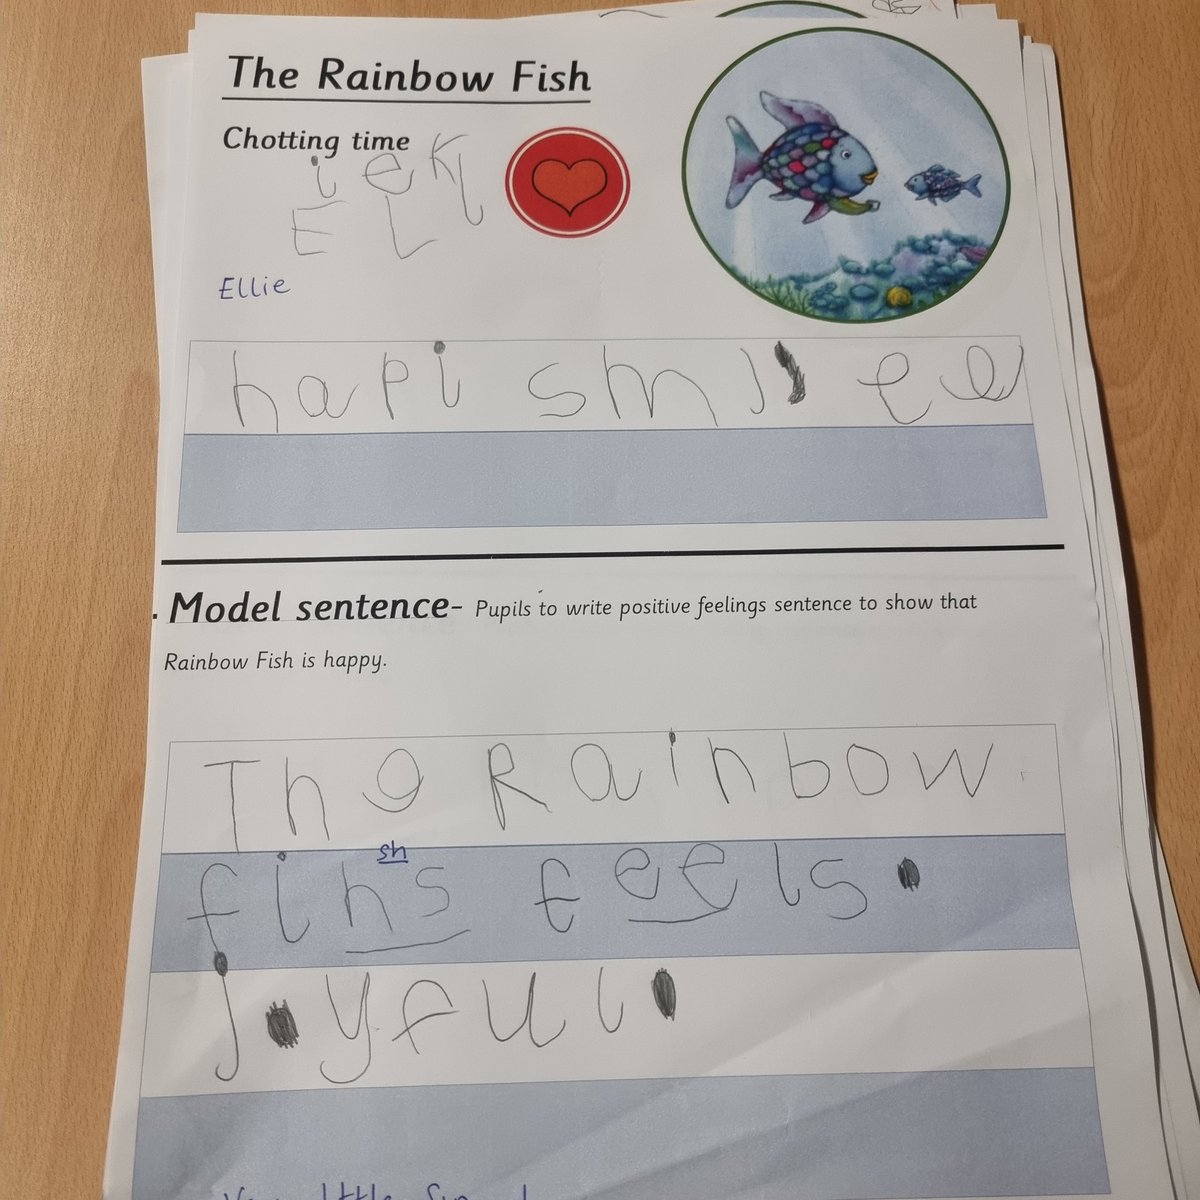 We had so much fun with our latest @janeconsidine unit following the story of 'The Rainbow Fish' by Marcus Pfister. The children's vocabulary retention and sentence writing has improved immensely. Here is a sneek peek of some chotting and writing. ✍️🌈🐟